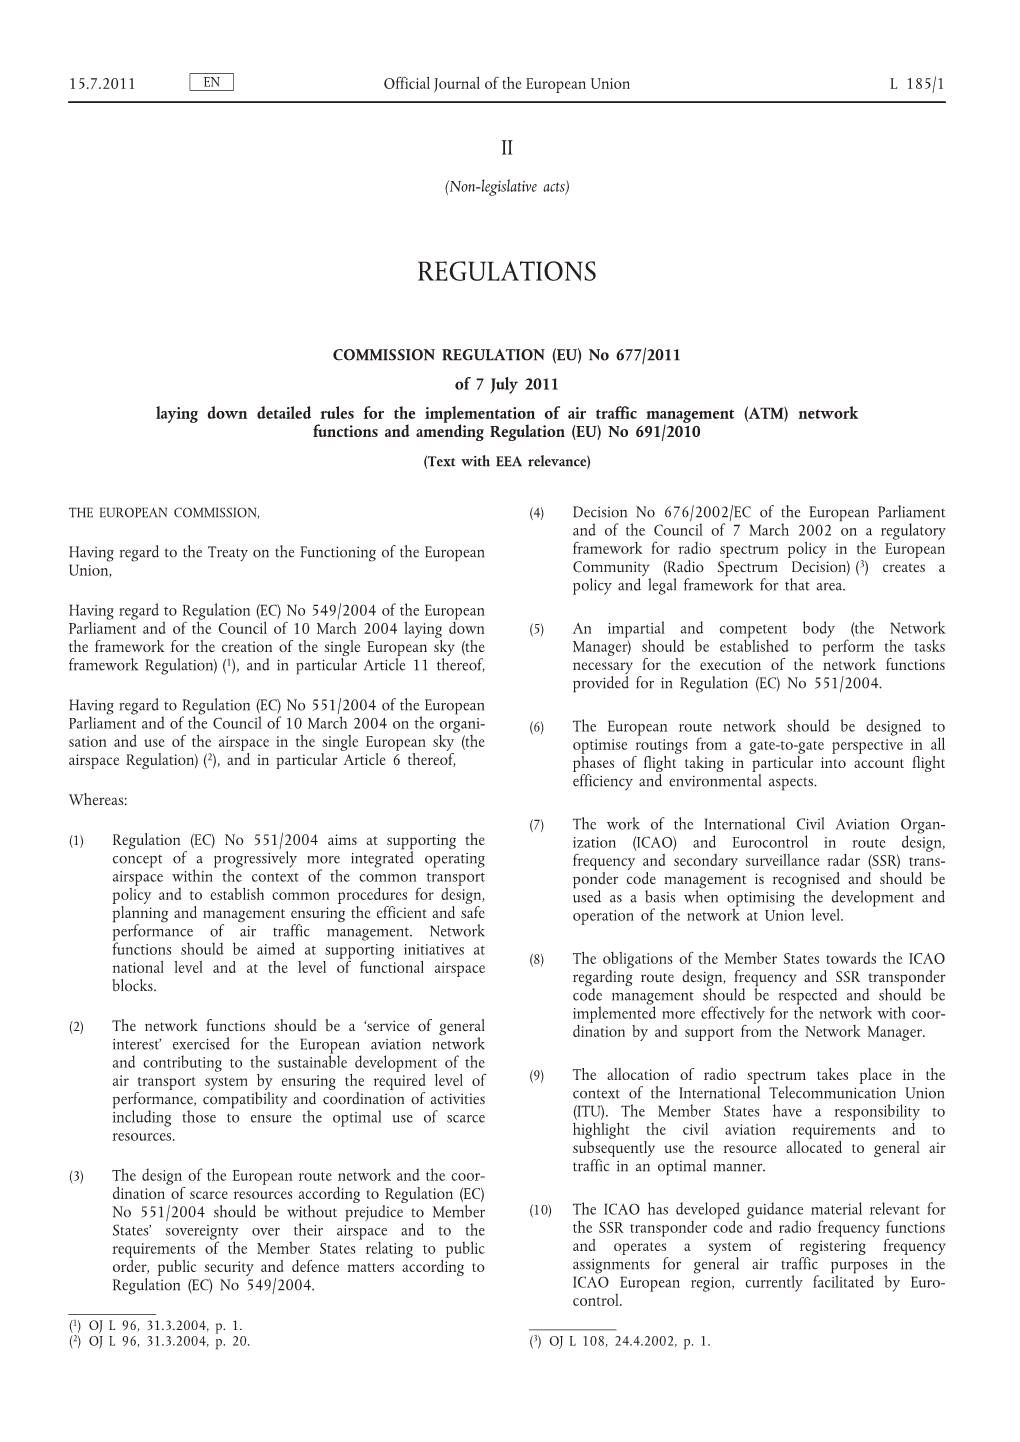 Regulation (EU) No 677/2011 Laying Down Detailed Rules For